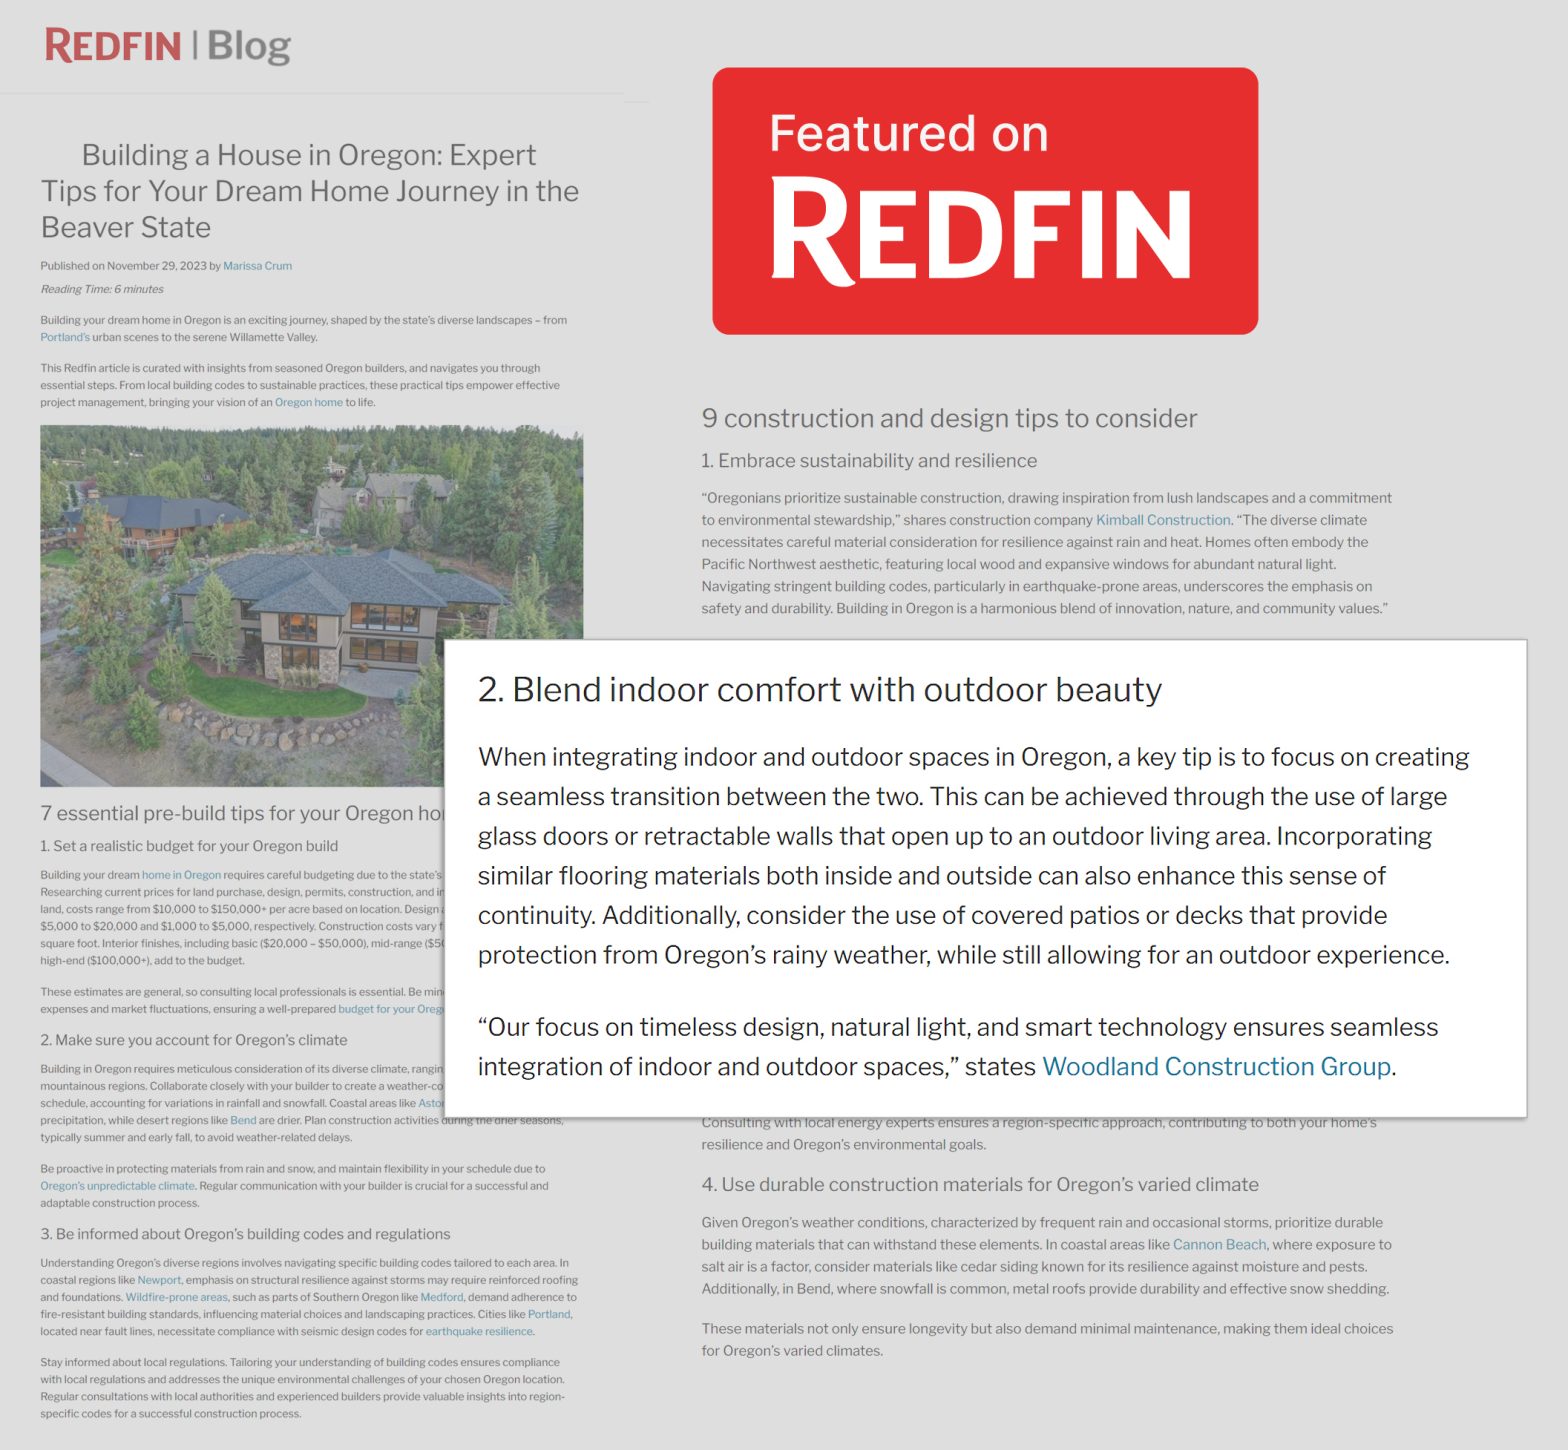 WCG - Featured on Redfin Blog - Building a house in Oregon